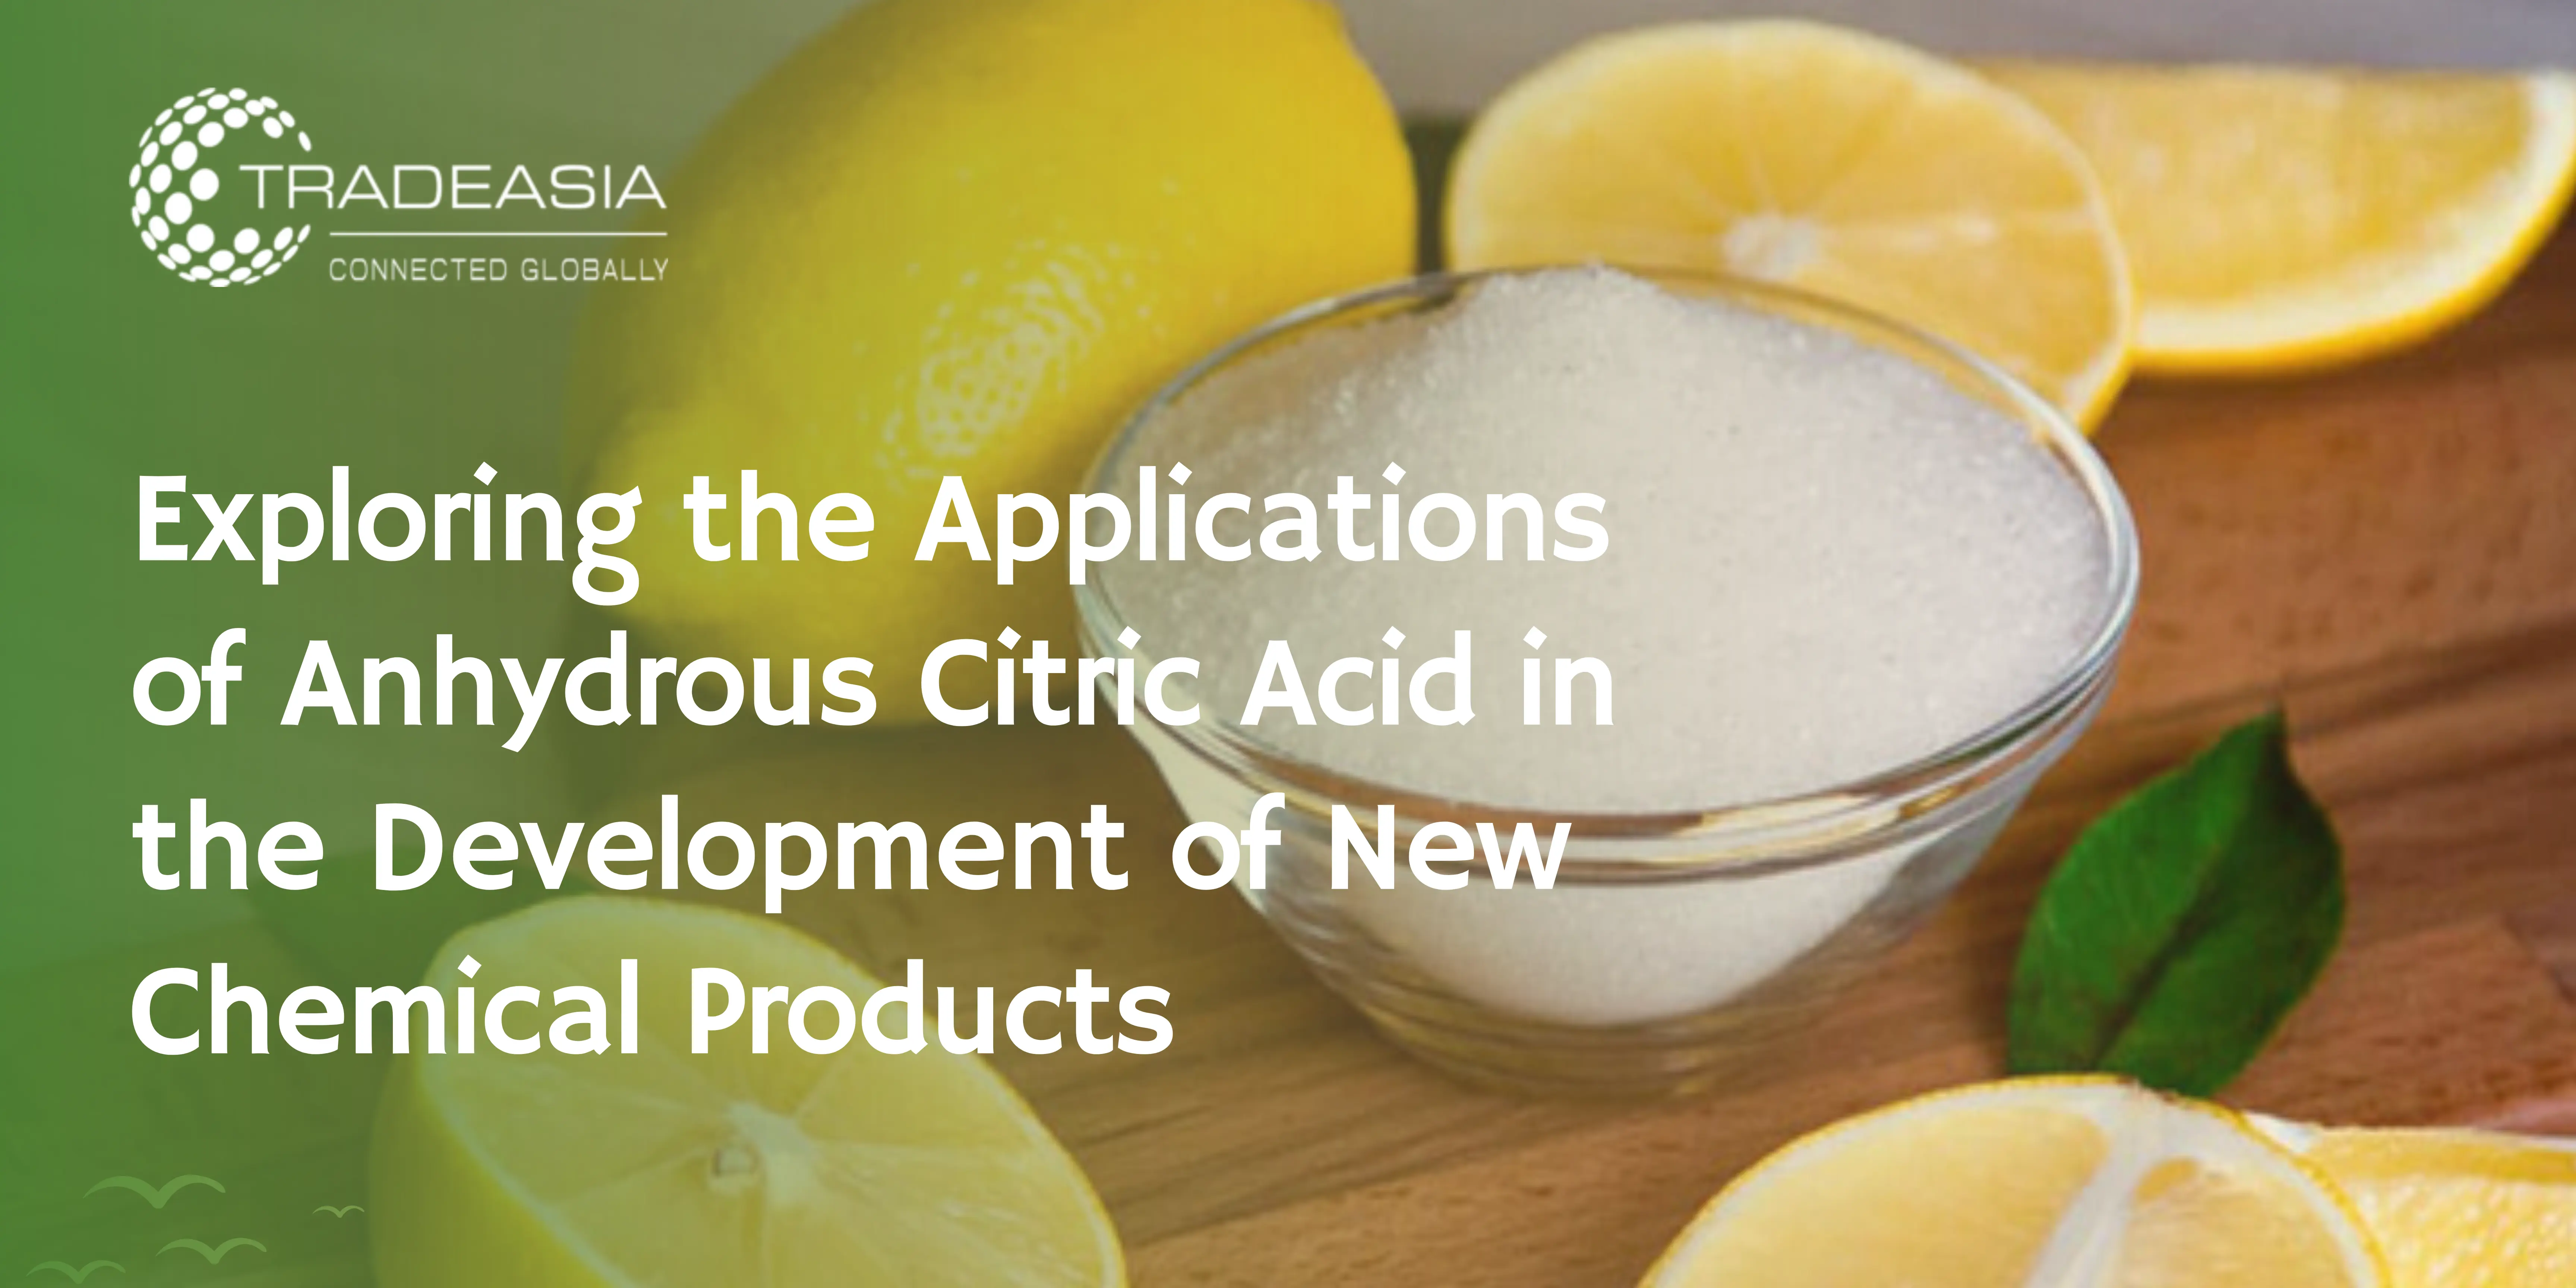 Exploring the Applications of Anhydrous Citric Acid in the Development of New Chemical Products